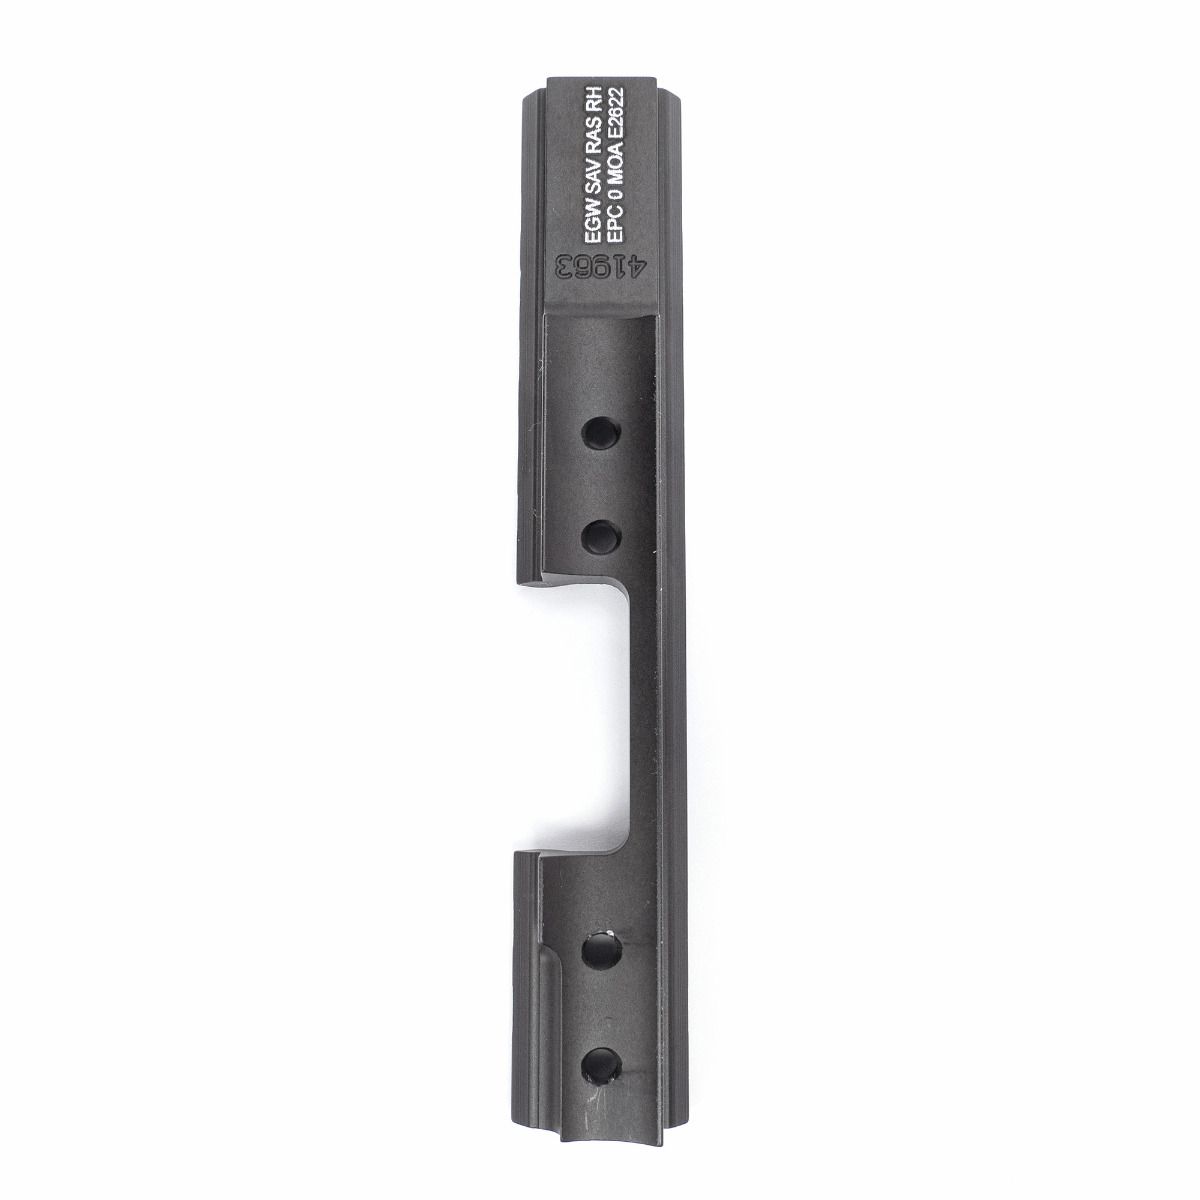 EGW Savage Rascal Picatinny Rail Scope Mount with Large Ejection Port Cutout